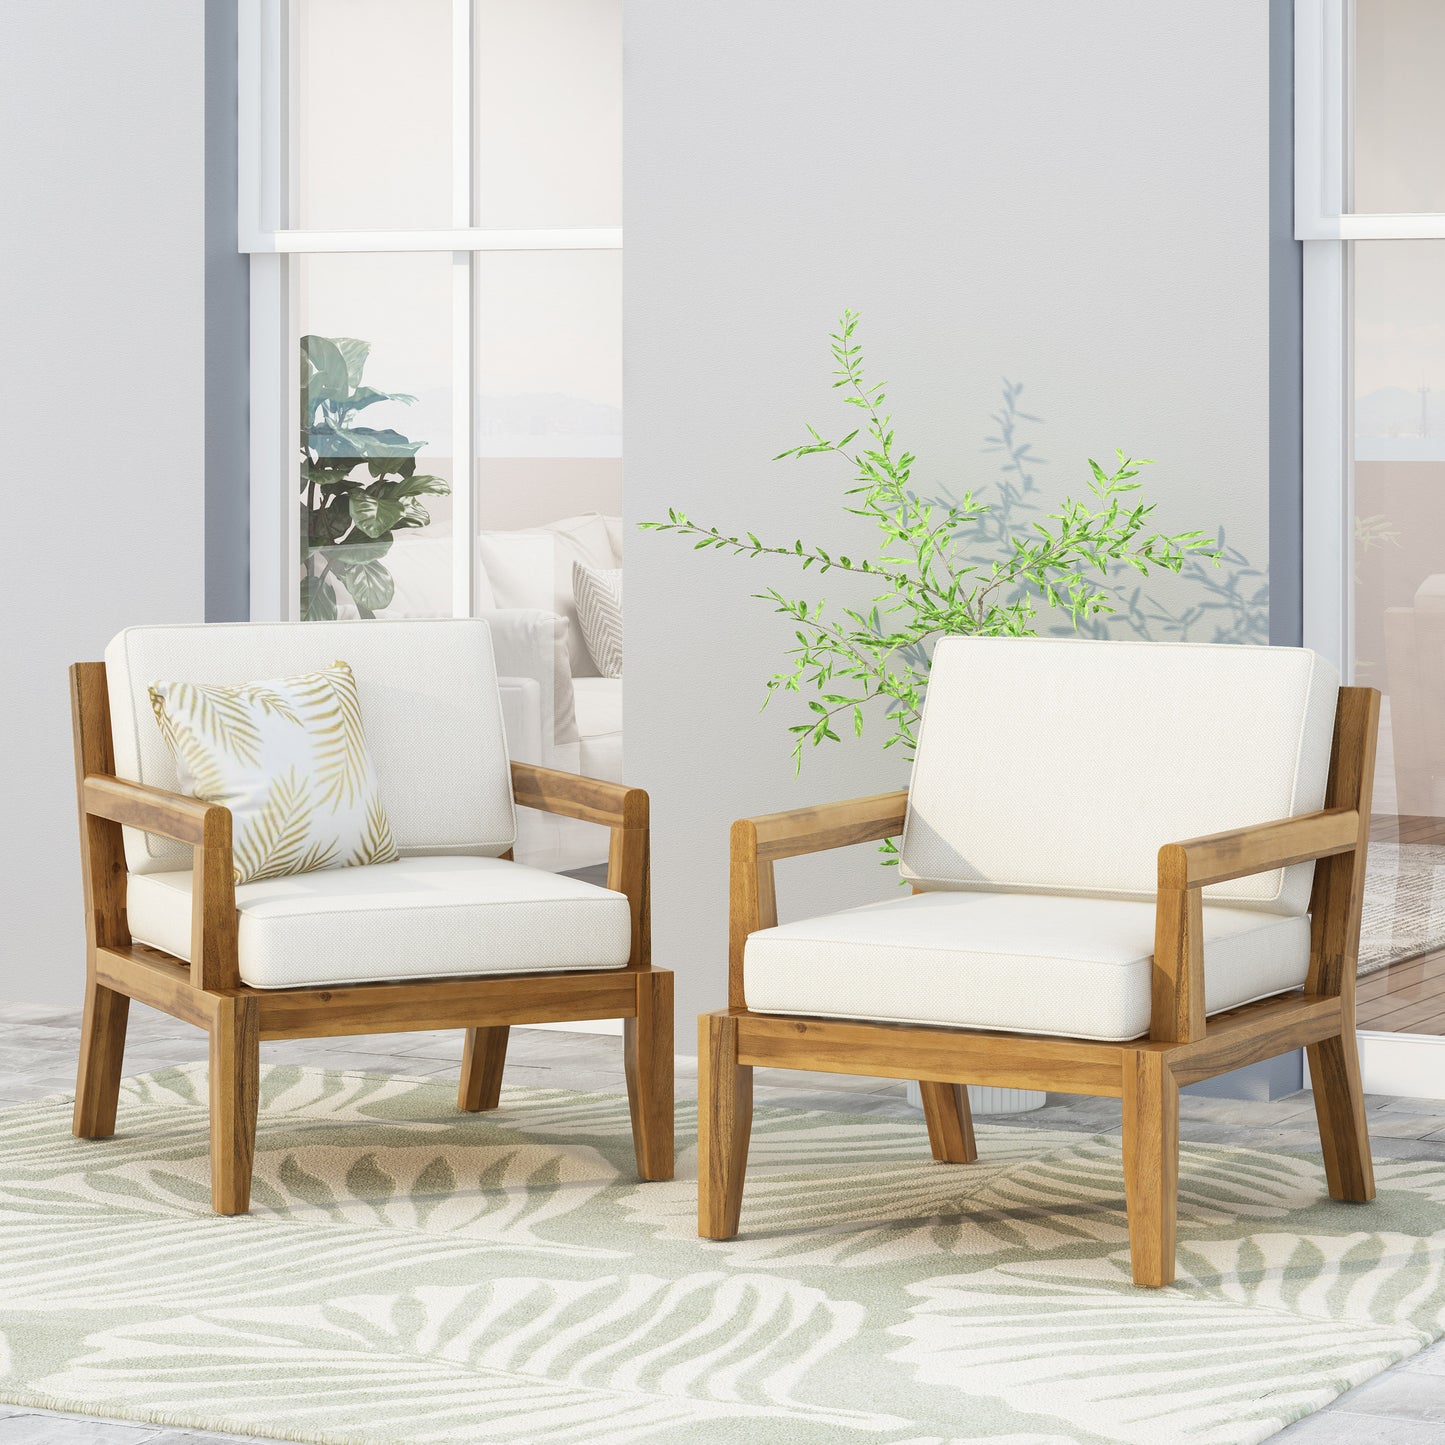 Camak Rossville Outdoor Acacia Wood Club Chairs with Cushions, Set of 2, Teak and Beige